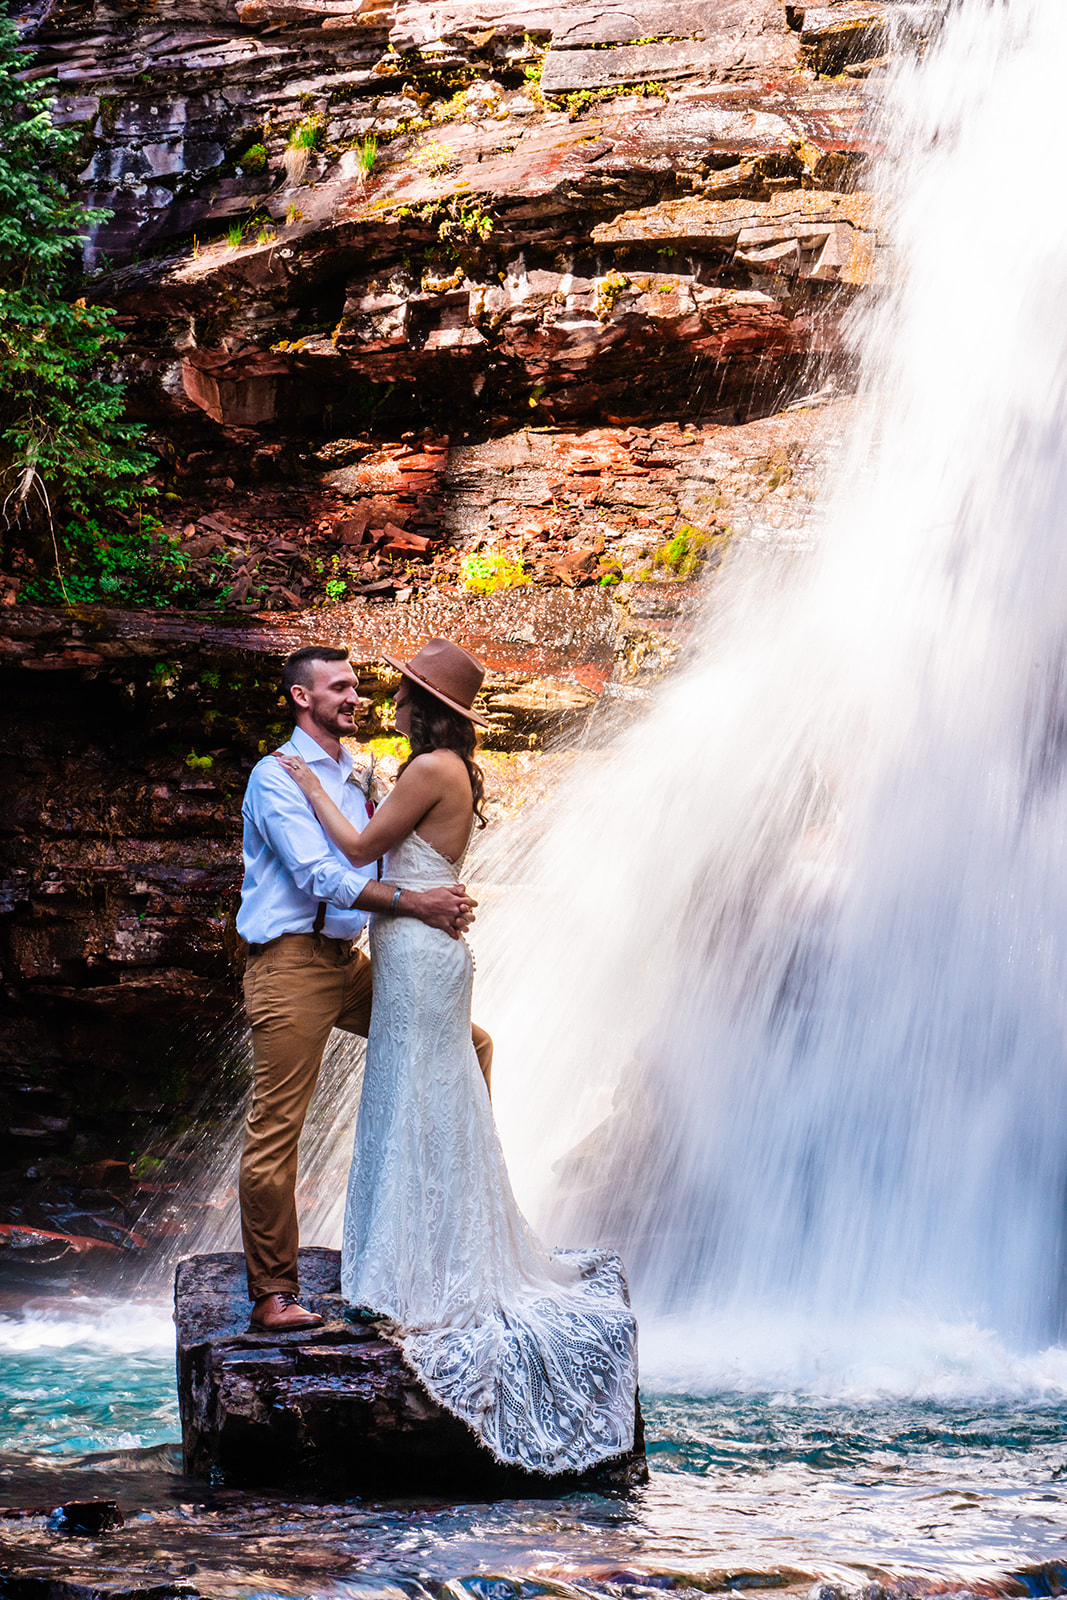 Bride and groom looking at one another endearingly next to a waterfall in the San Juan mountains